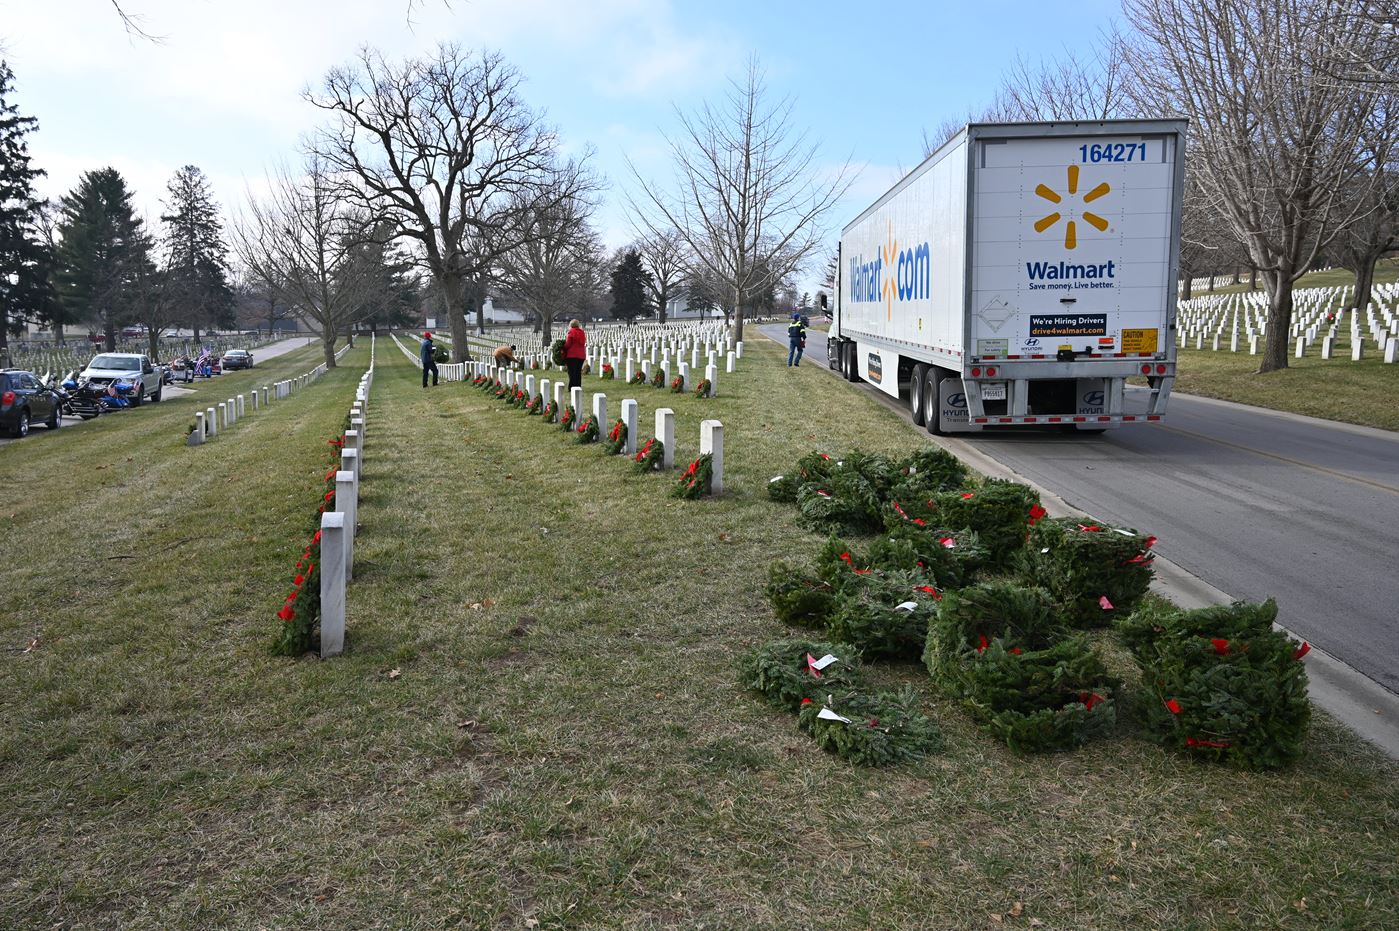 Volunteers at the Fort Leavenworth National Cemetery unloaded a Walmart truck full of wreaths for the Dec. 19, 2020 Wreaths Across America Day.